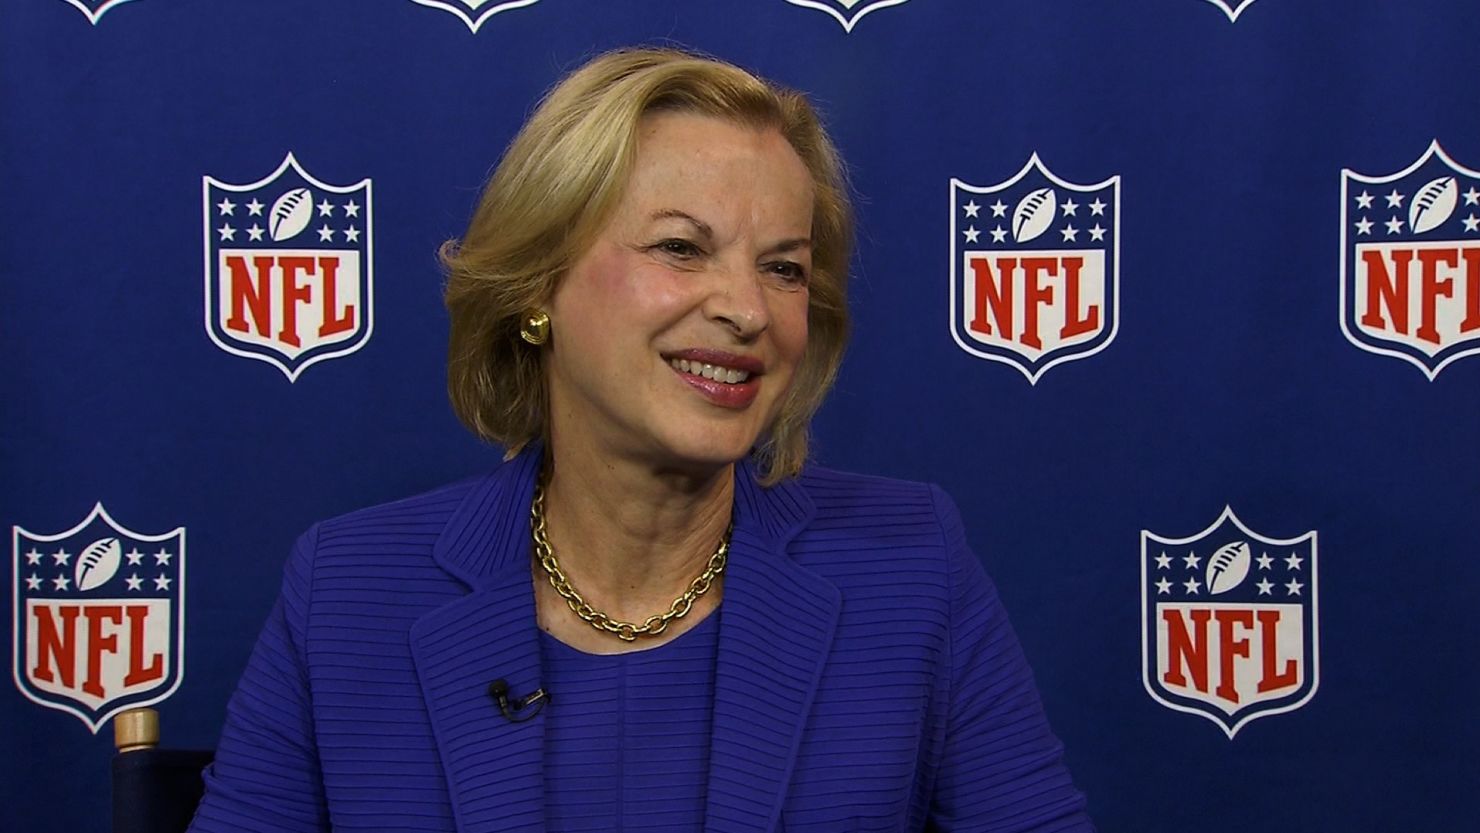 Dr. Betsy Nabel was named NFL Chief Health and Safety Adviser in February. She spoke to the media for the first time Tuesday at NFL headquarters in New York. 